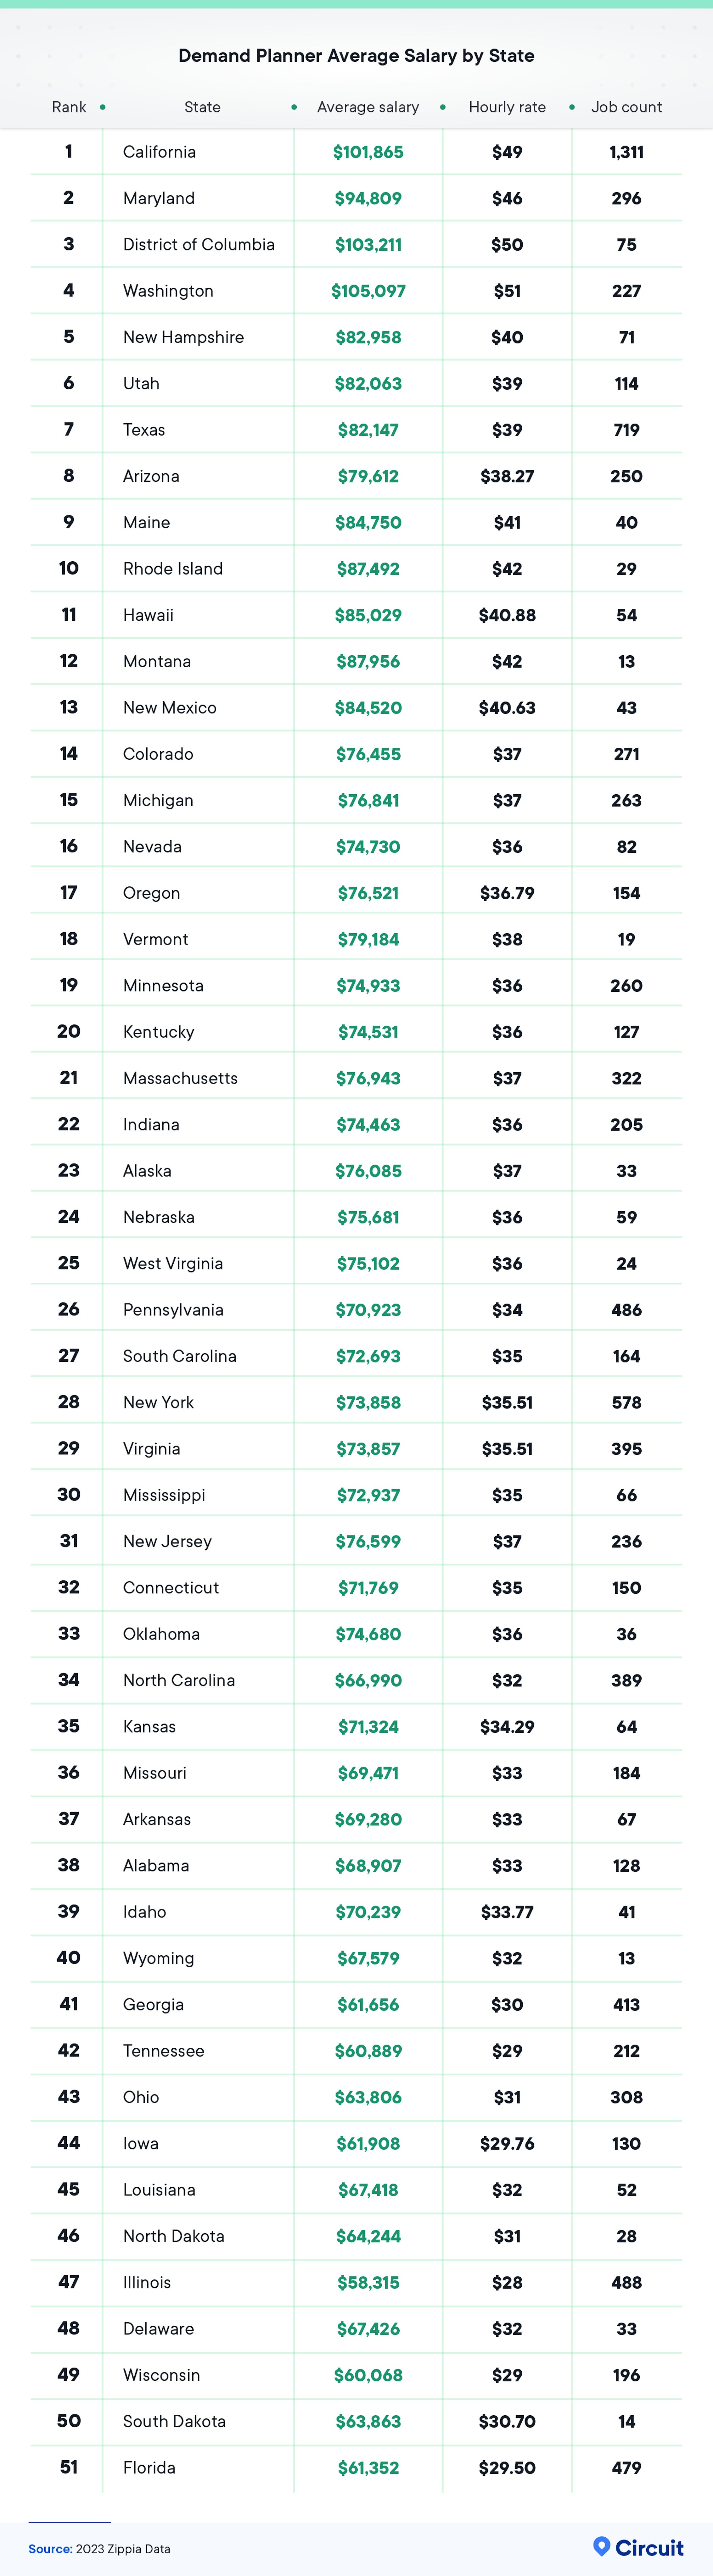 Demand planner average salary by state